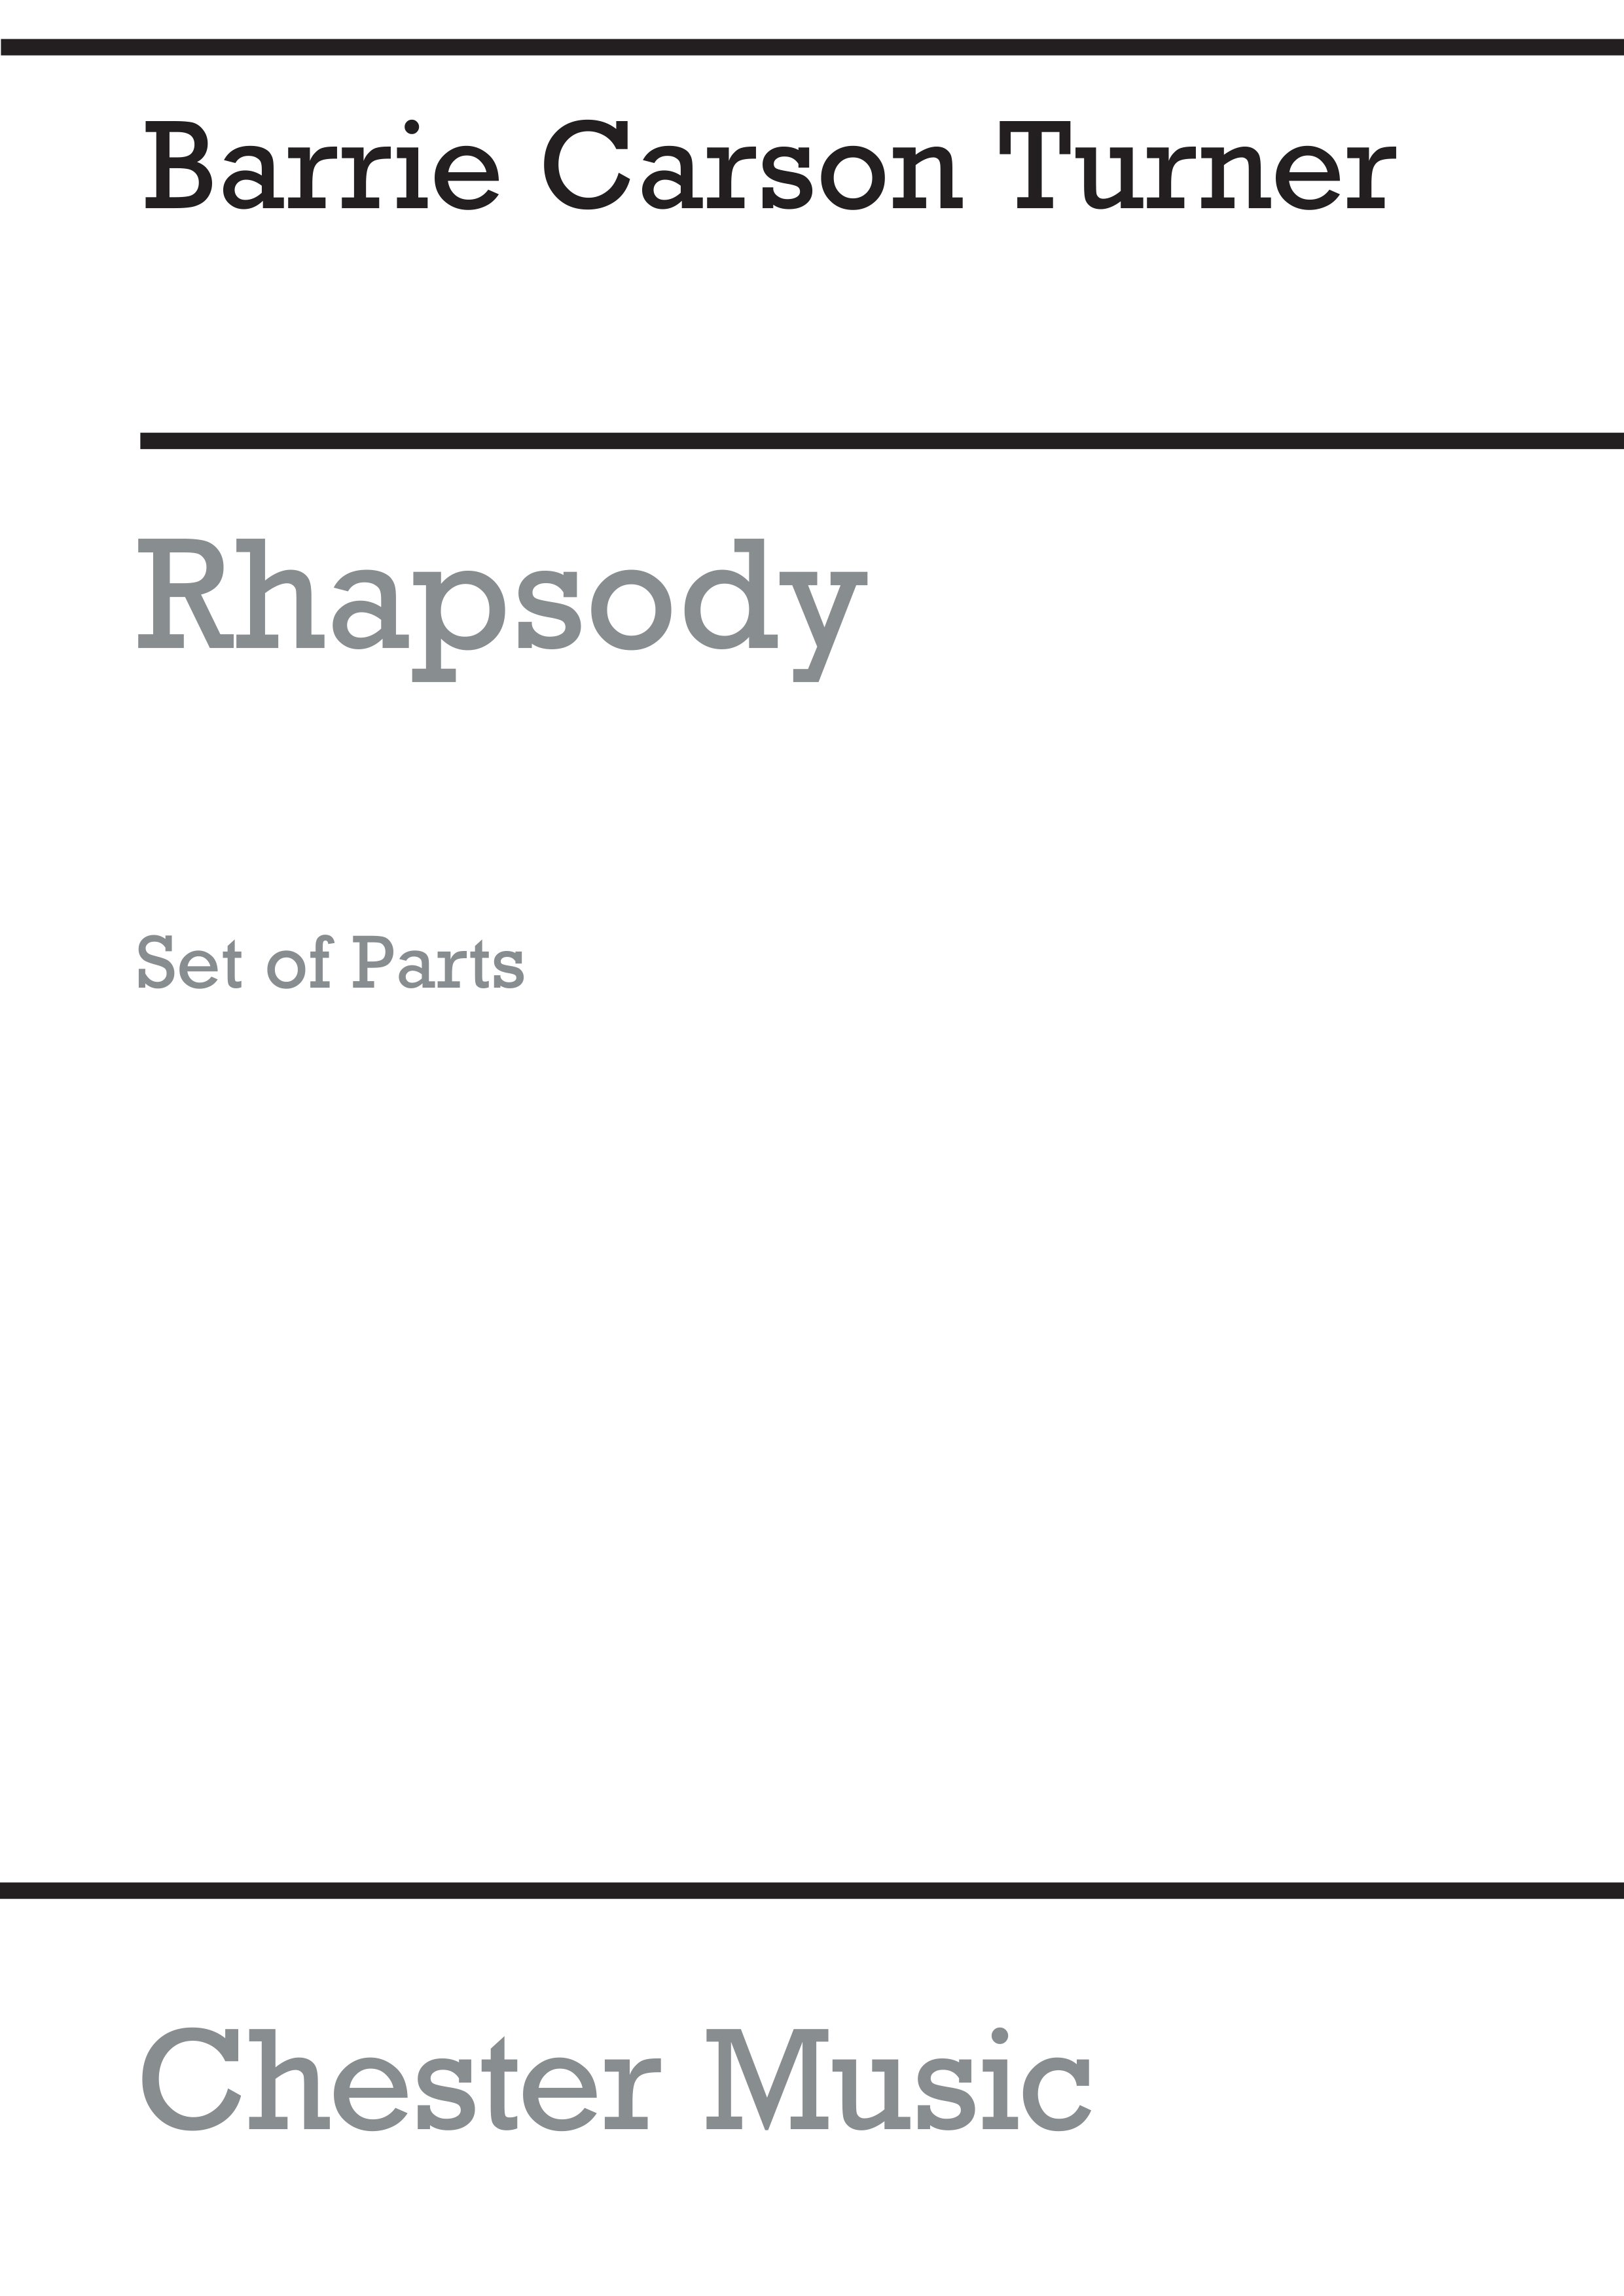 Barrie Carson Turner: Playstrings Moderately Easy No. 15 Rhapsody: Orchestra: